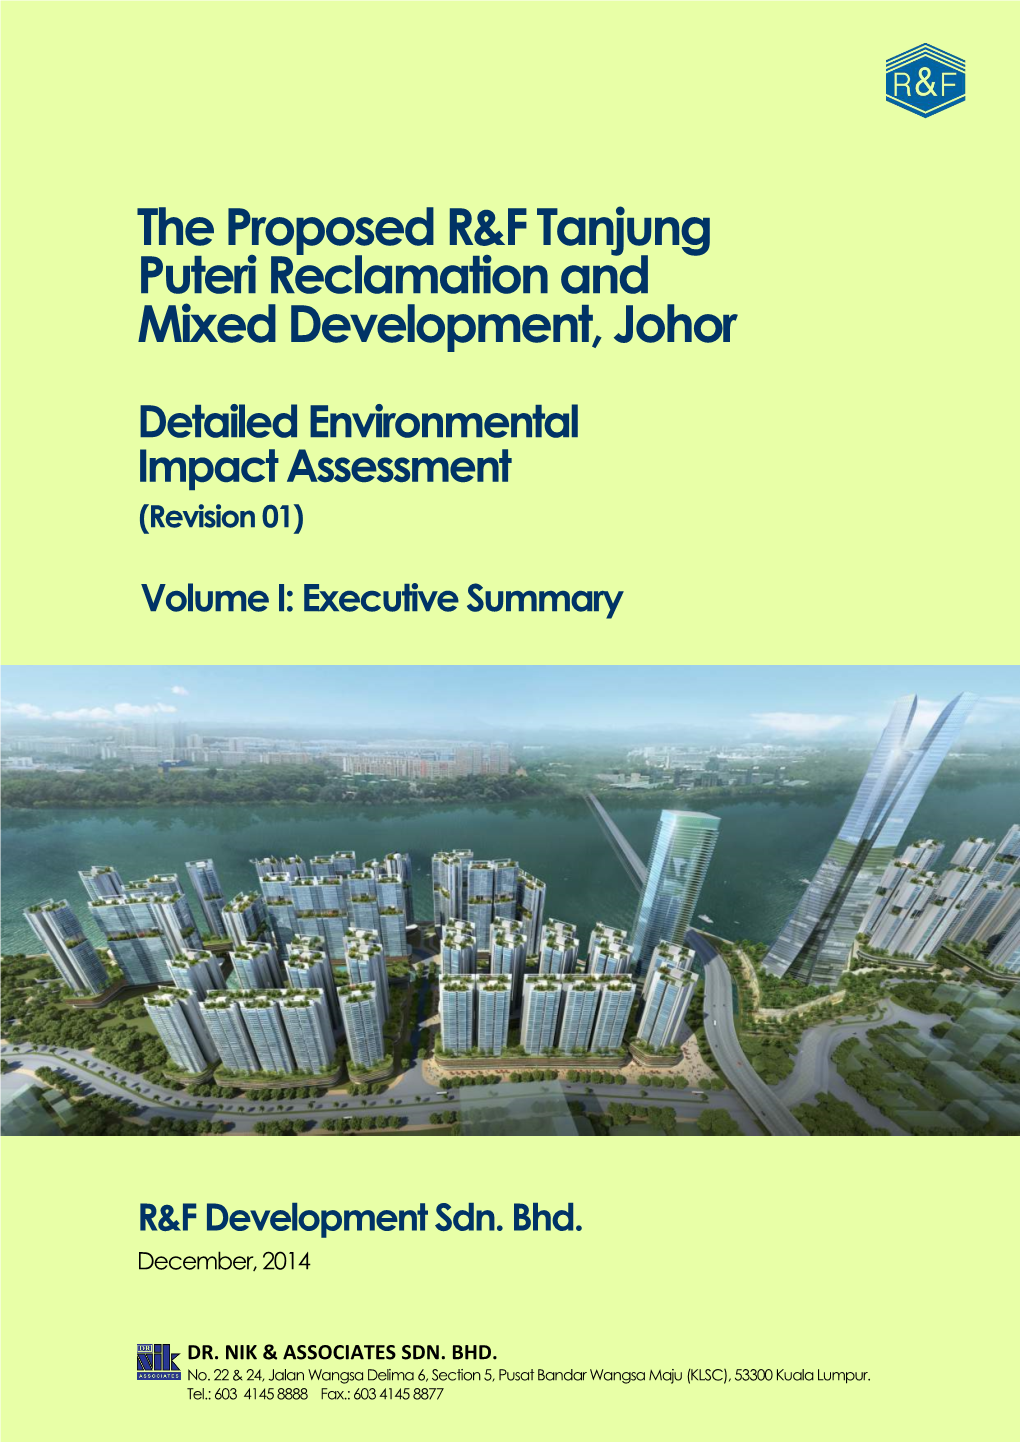 The Proposed R&F Tanjung Puteri Reclamation and Mixed